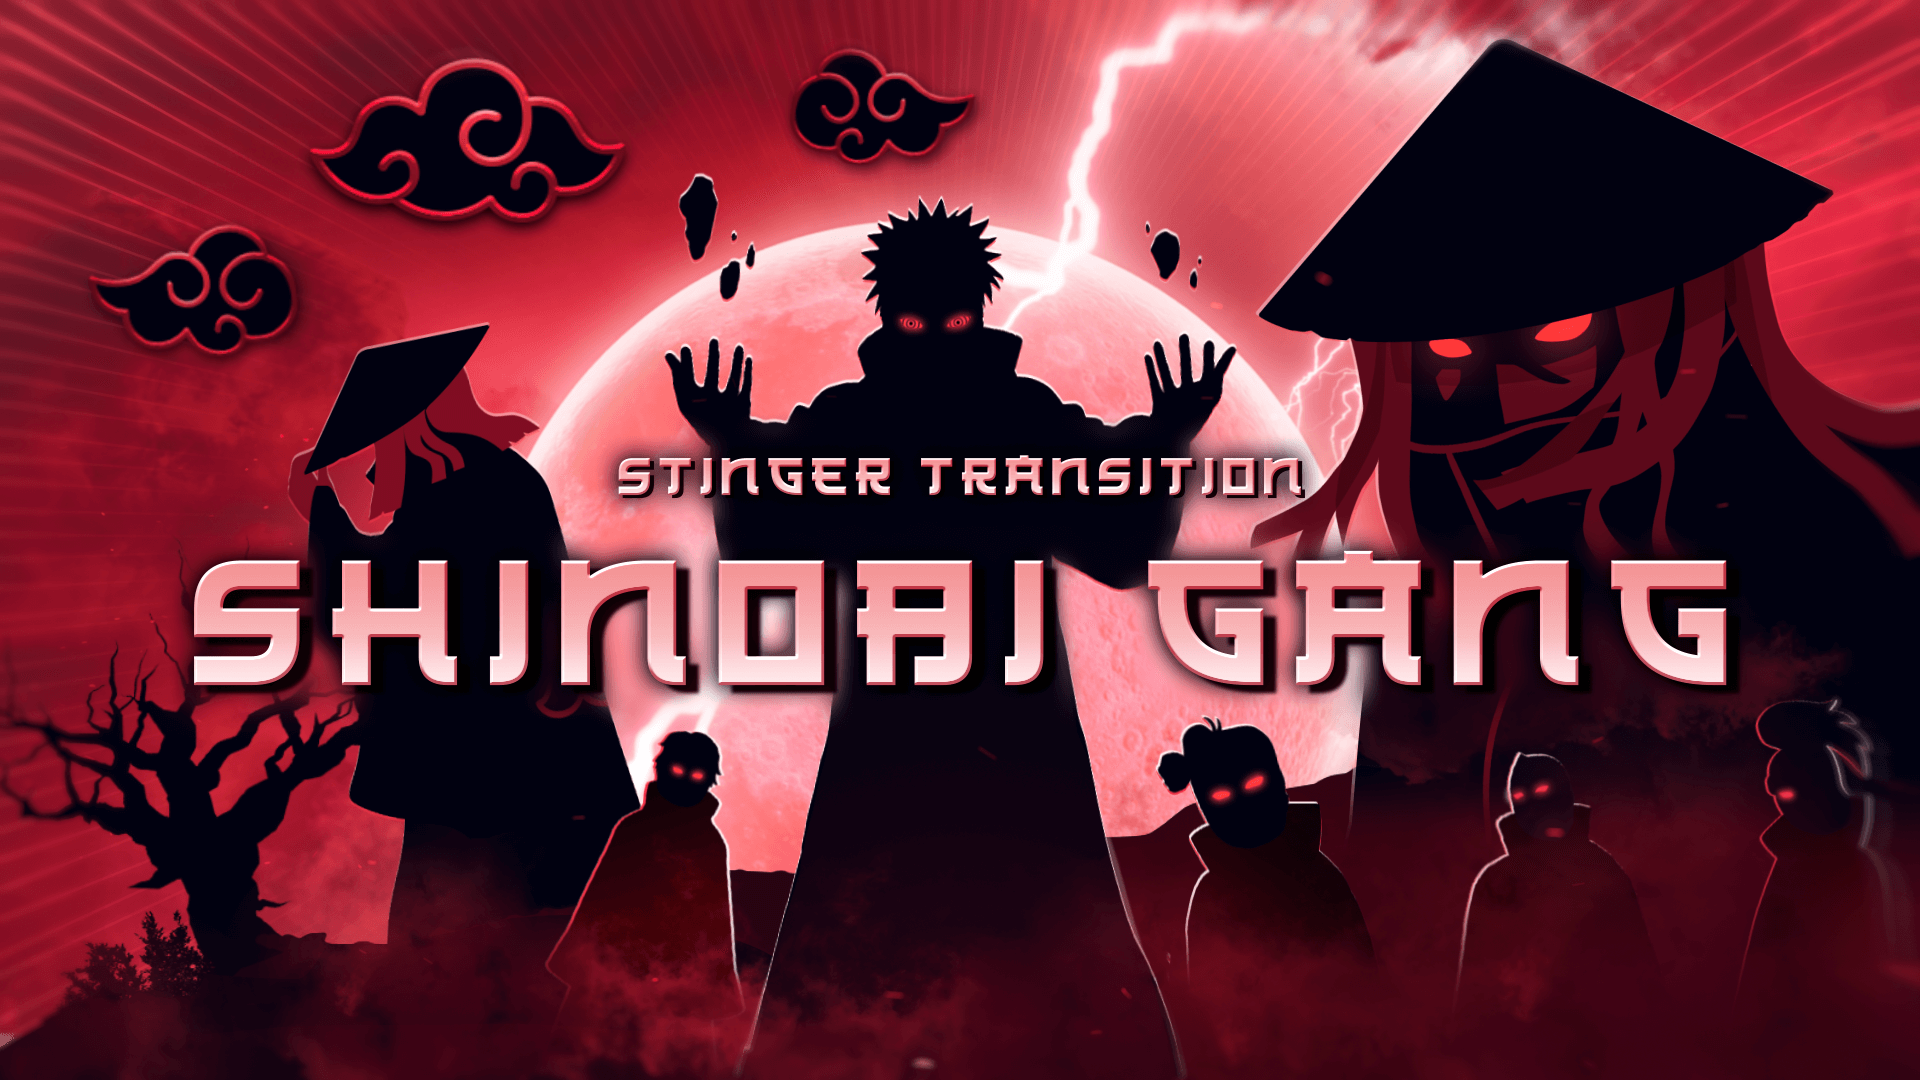 Shinobi Gang - Stinger Transition for Twitch, Youtube and Facebook